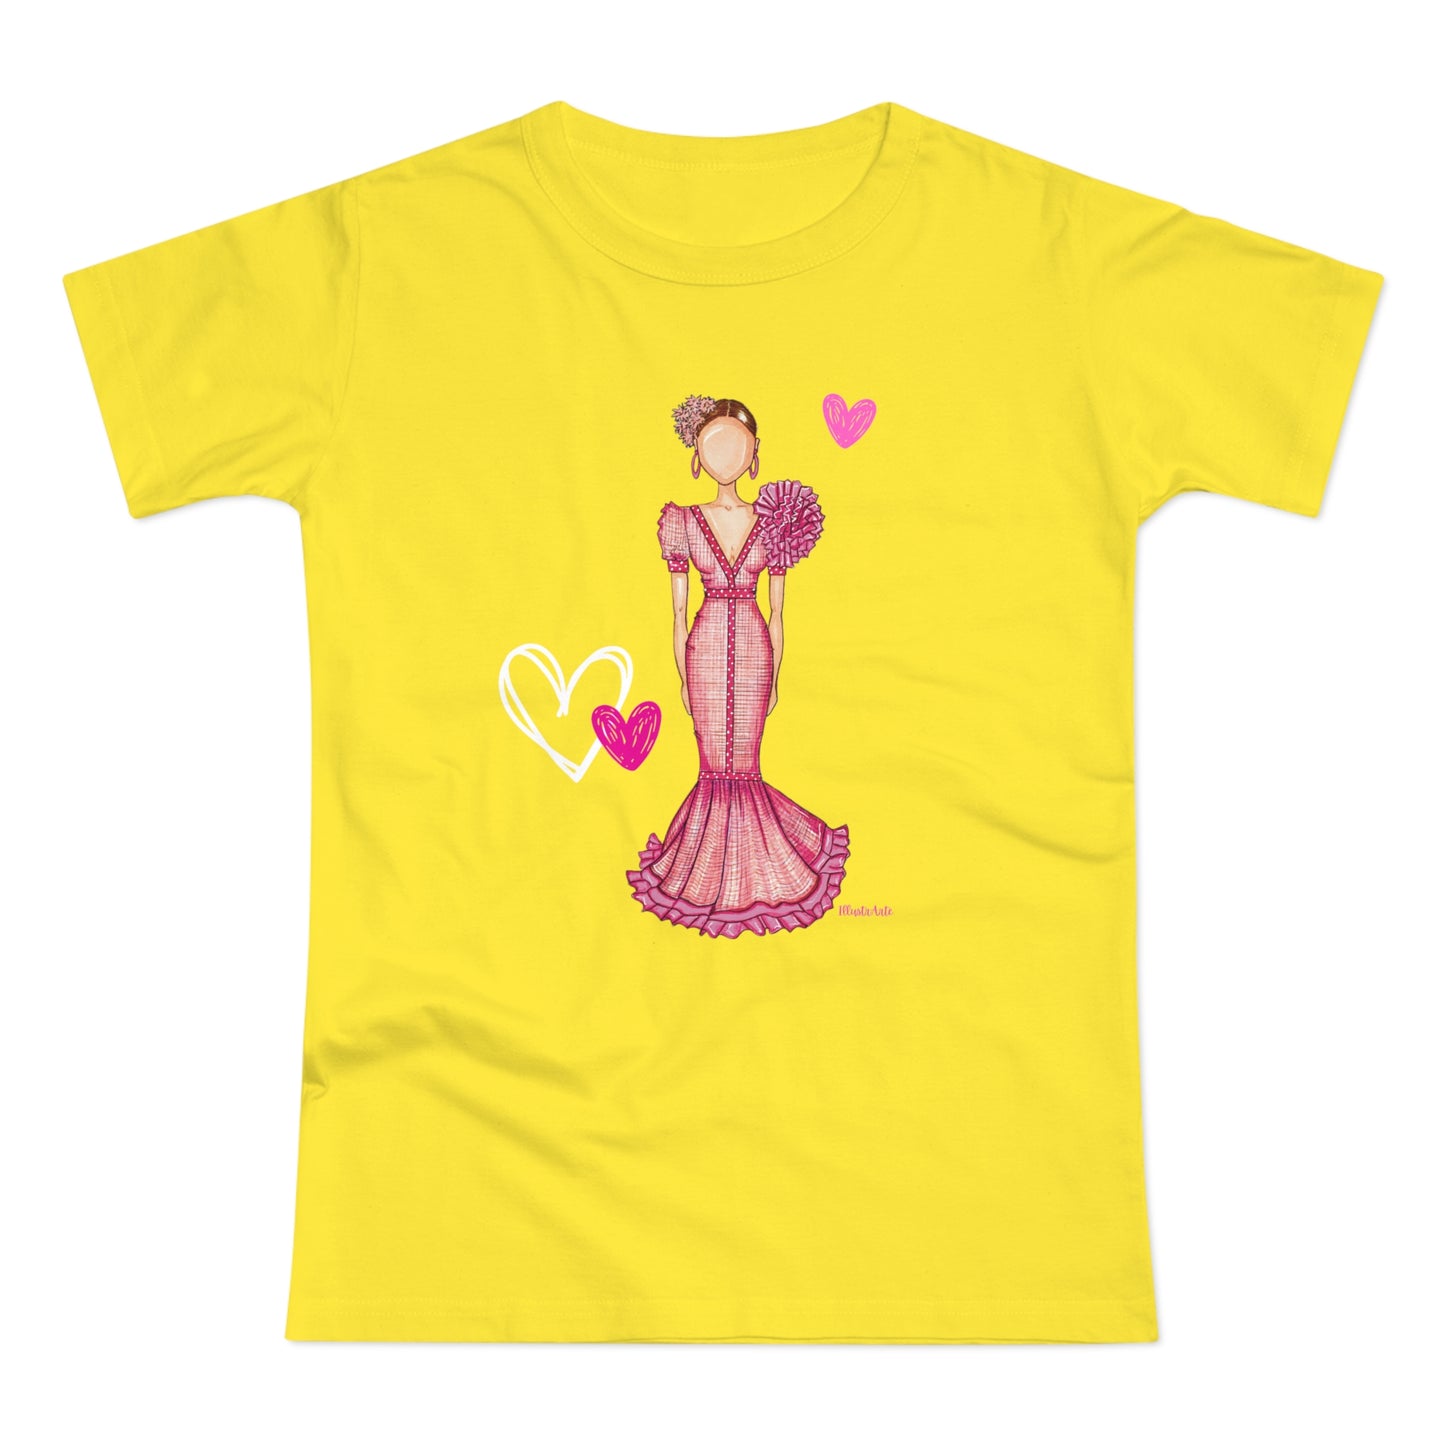 a yellow t - shirt with a drawing of a woman in a pink dress